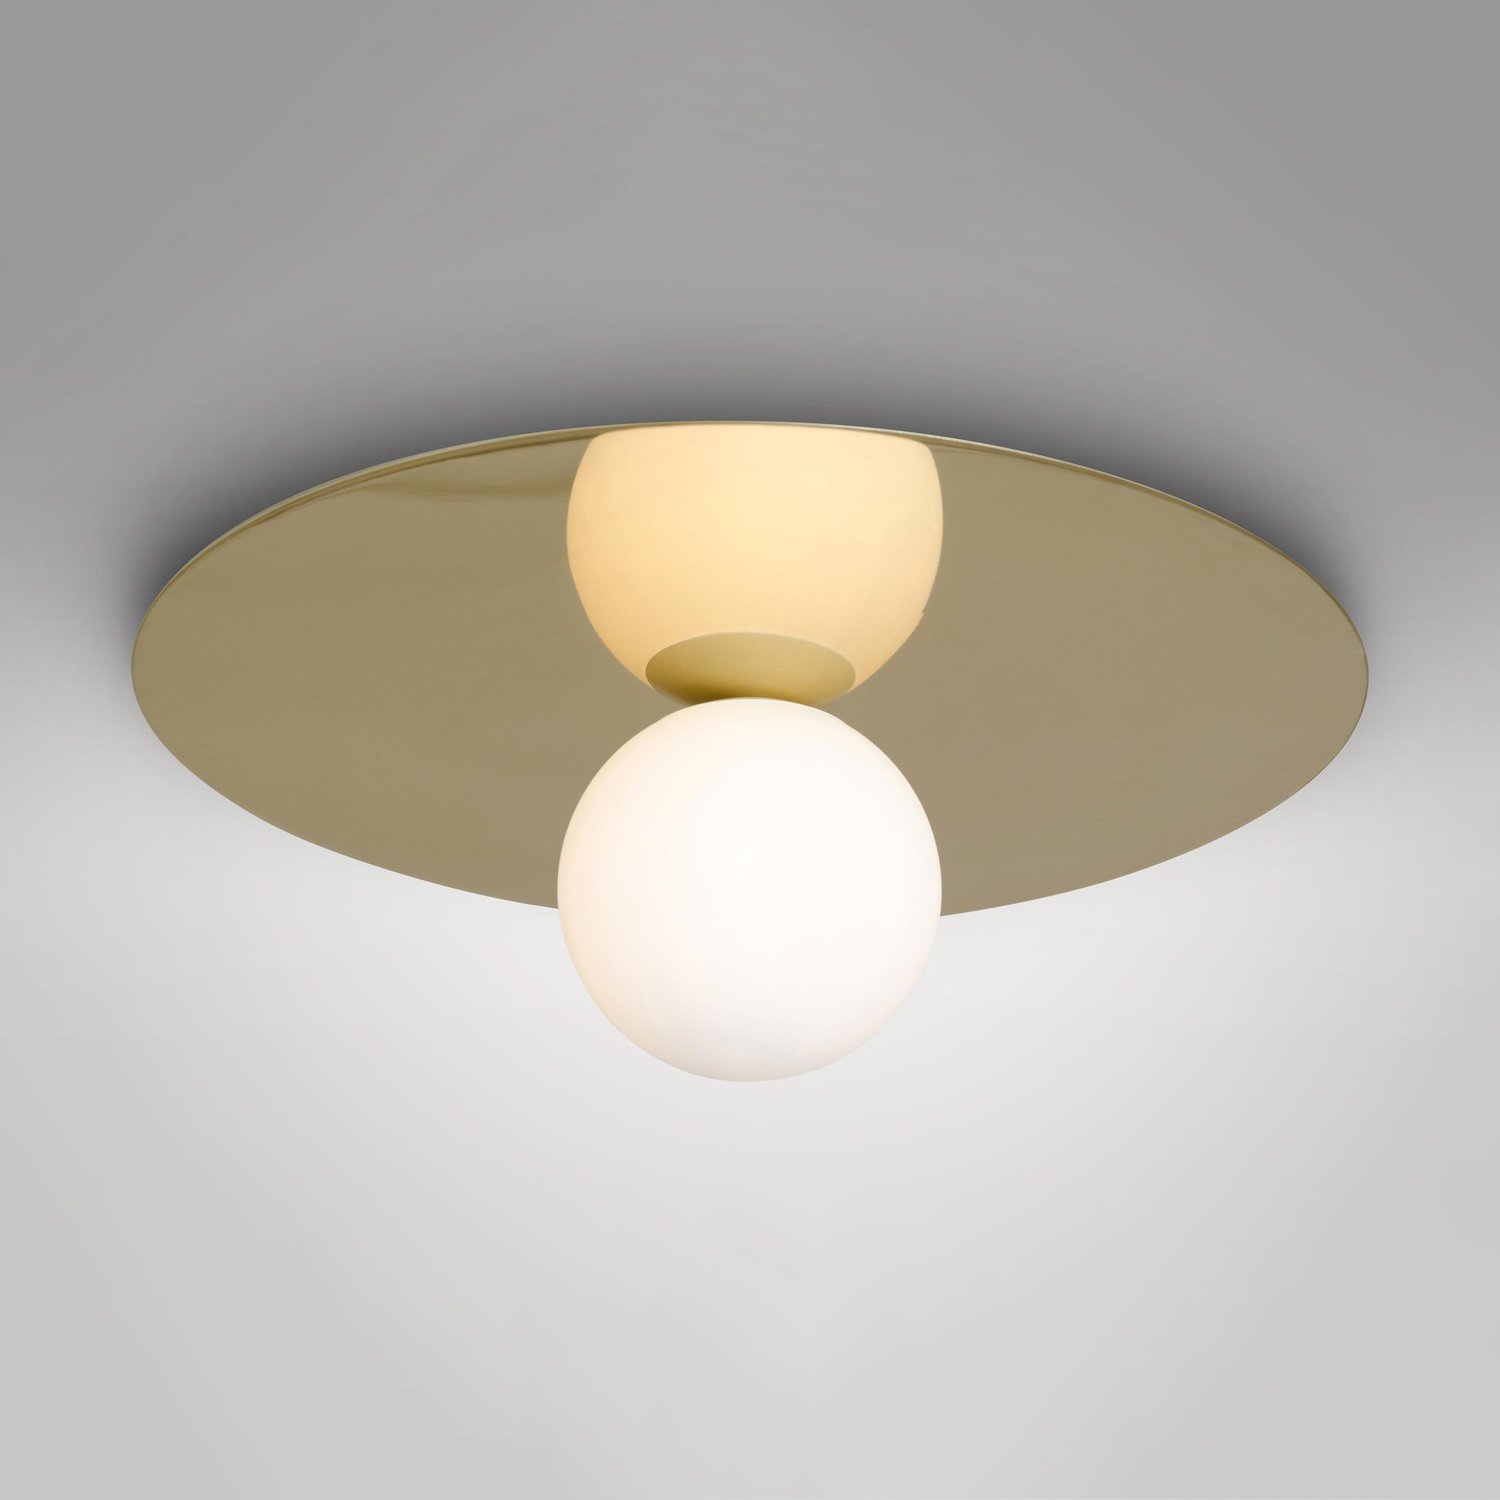 PLATE AND SPHERE CEILING LIGHT / OPTION 1 / LARGE 65cm